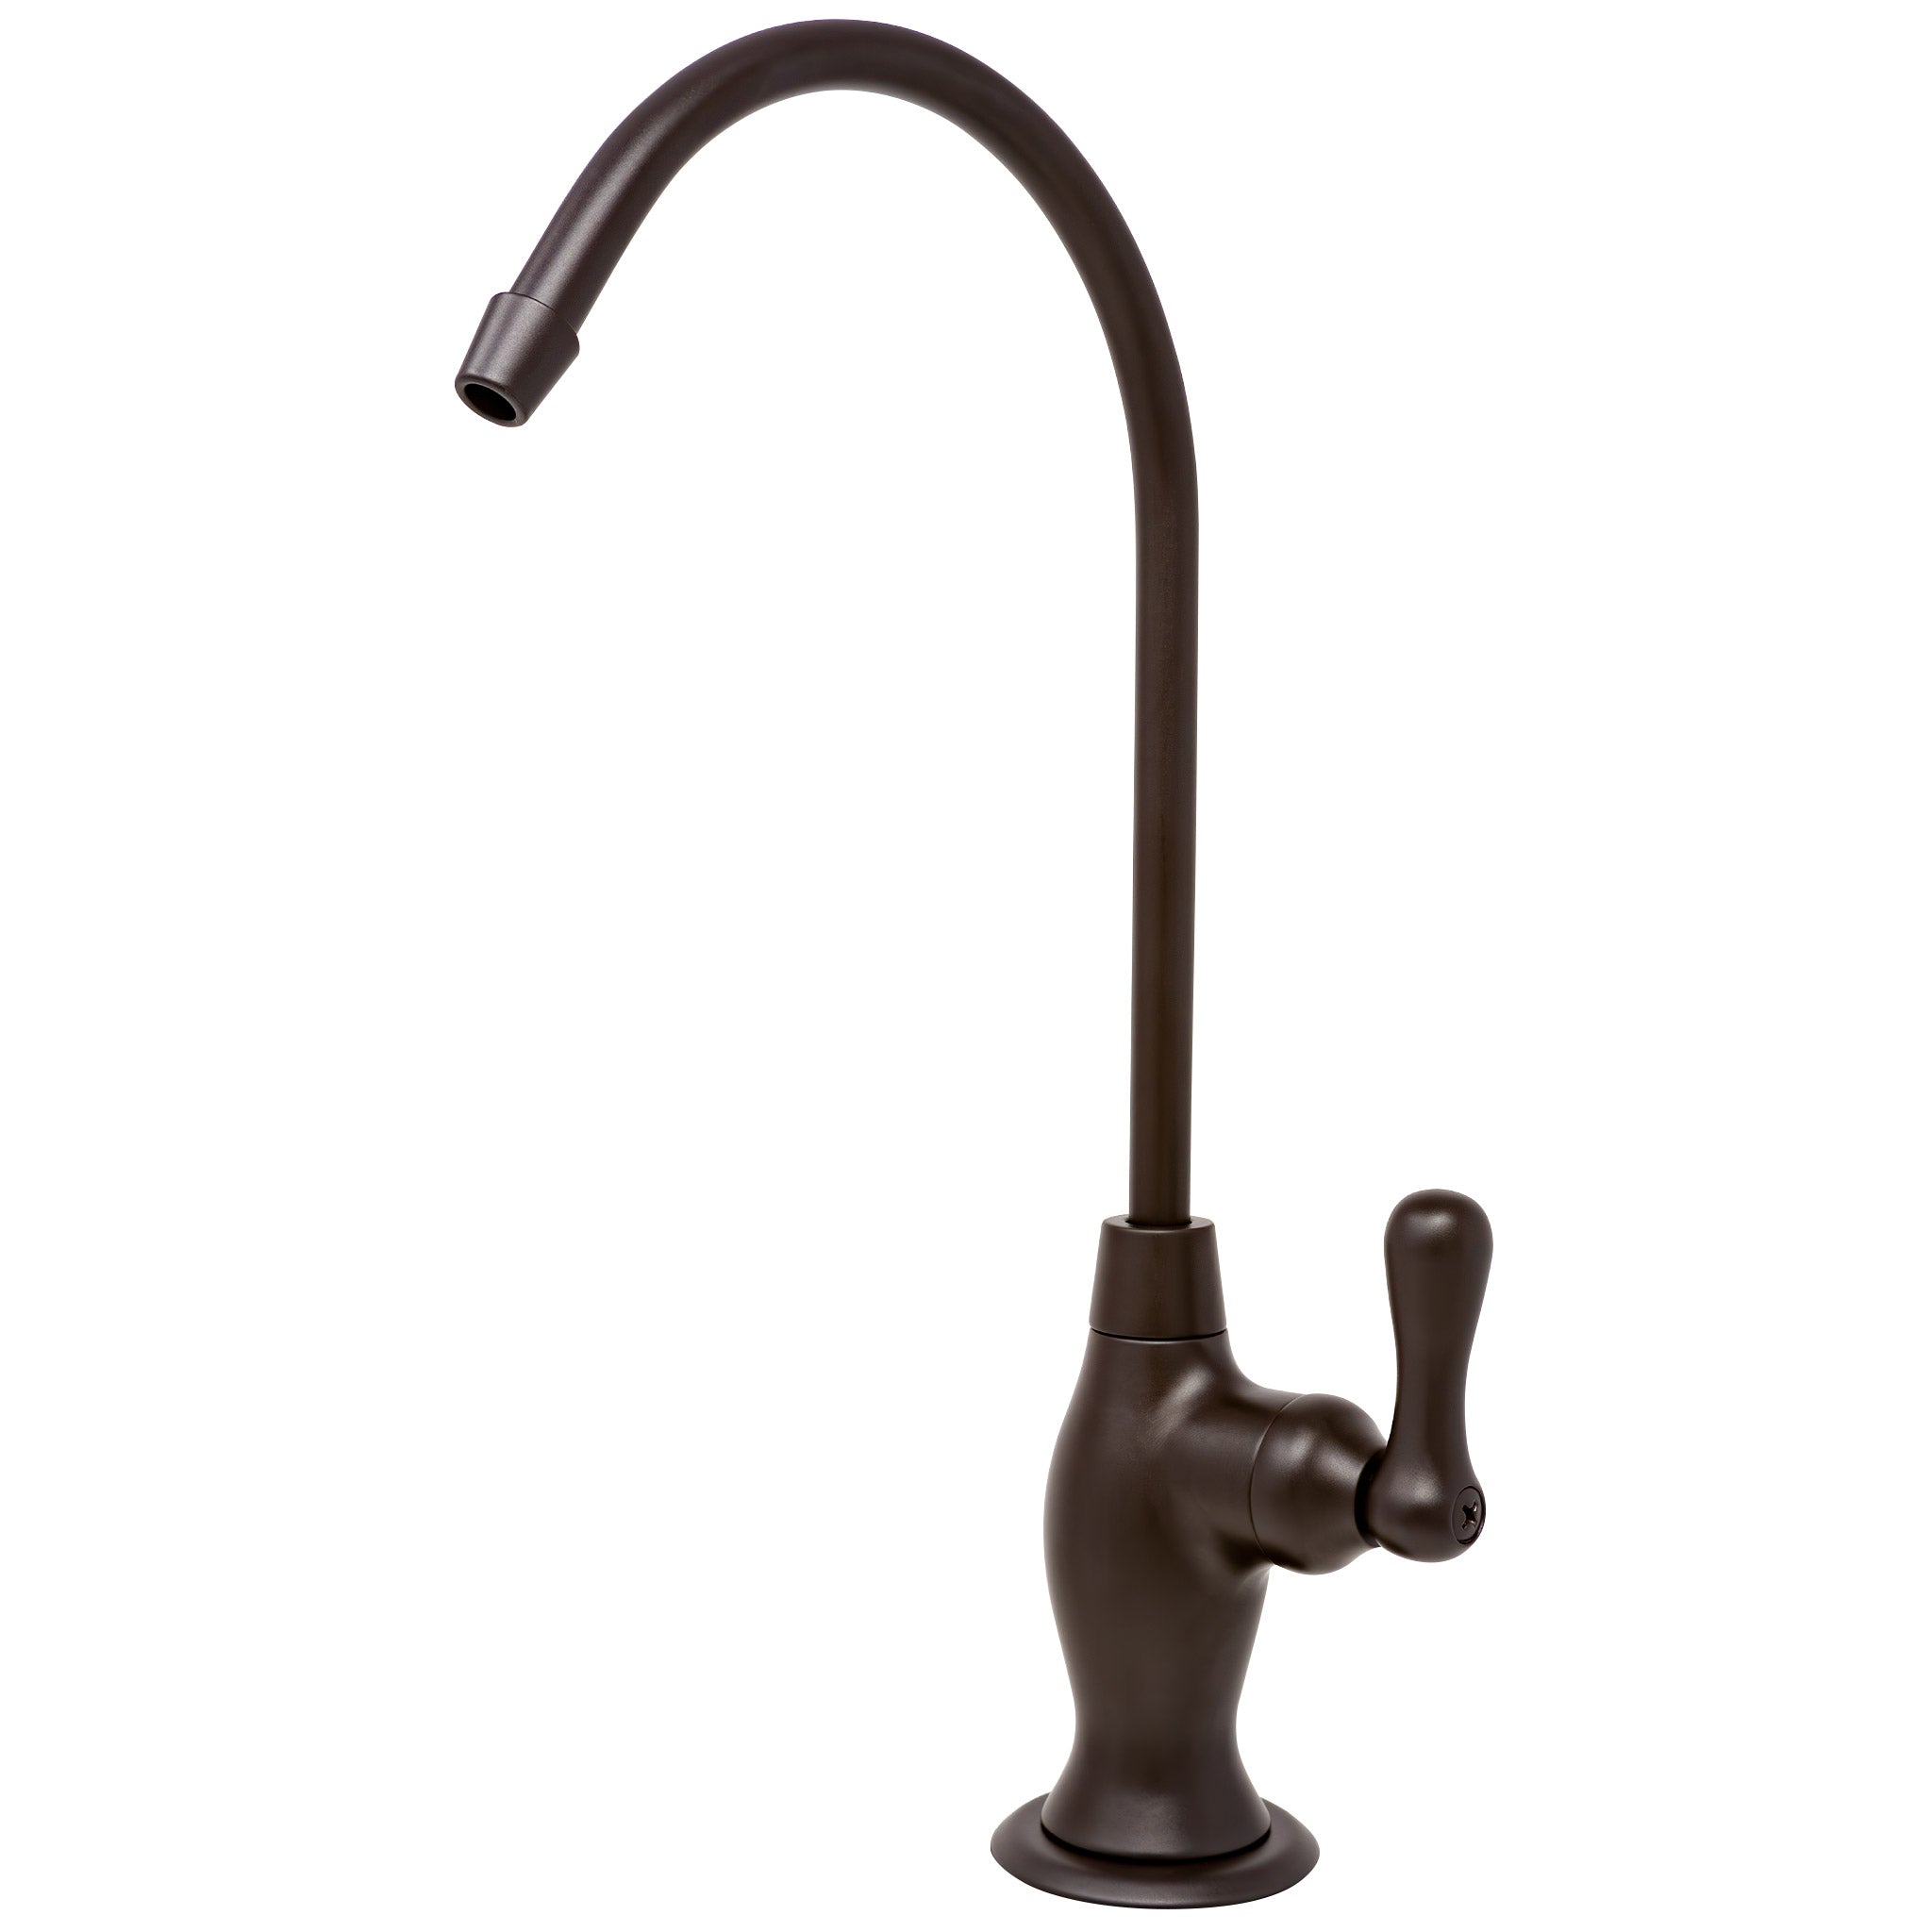 Water Filtration Faucet Vase Style Oil Rubbed Bronze Reverse Osmosis Non Air Gap. Certified by NSF.